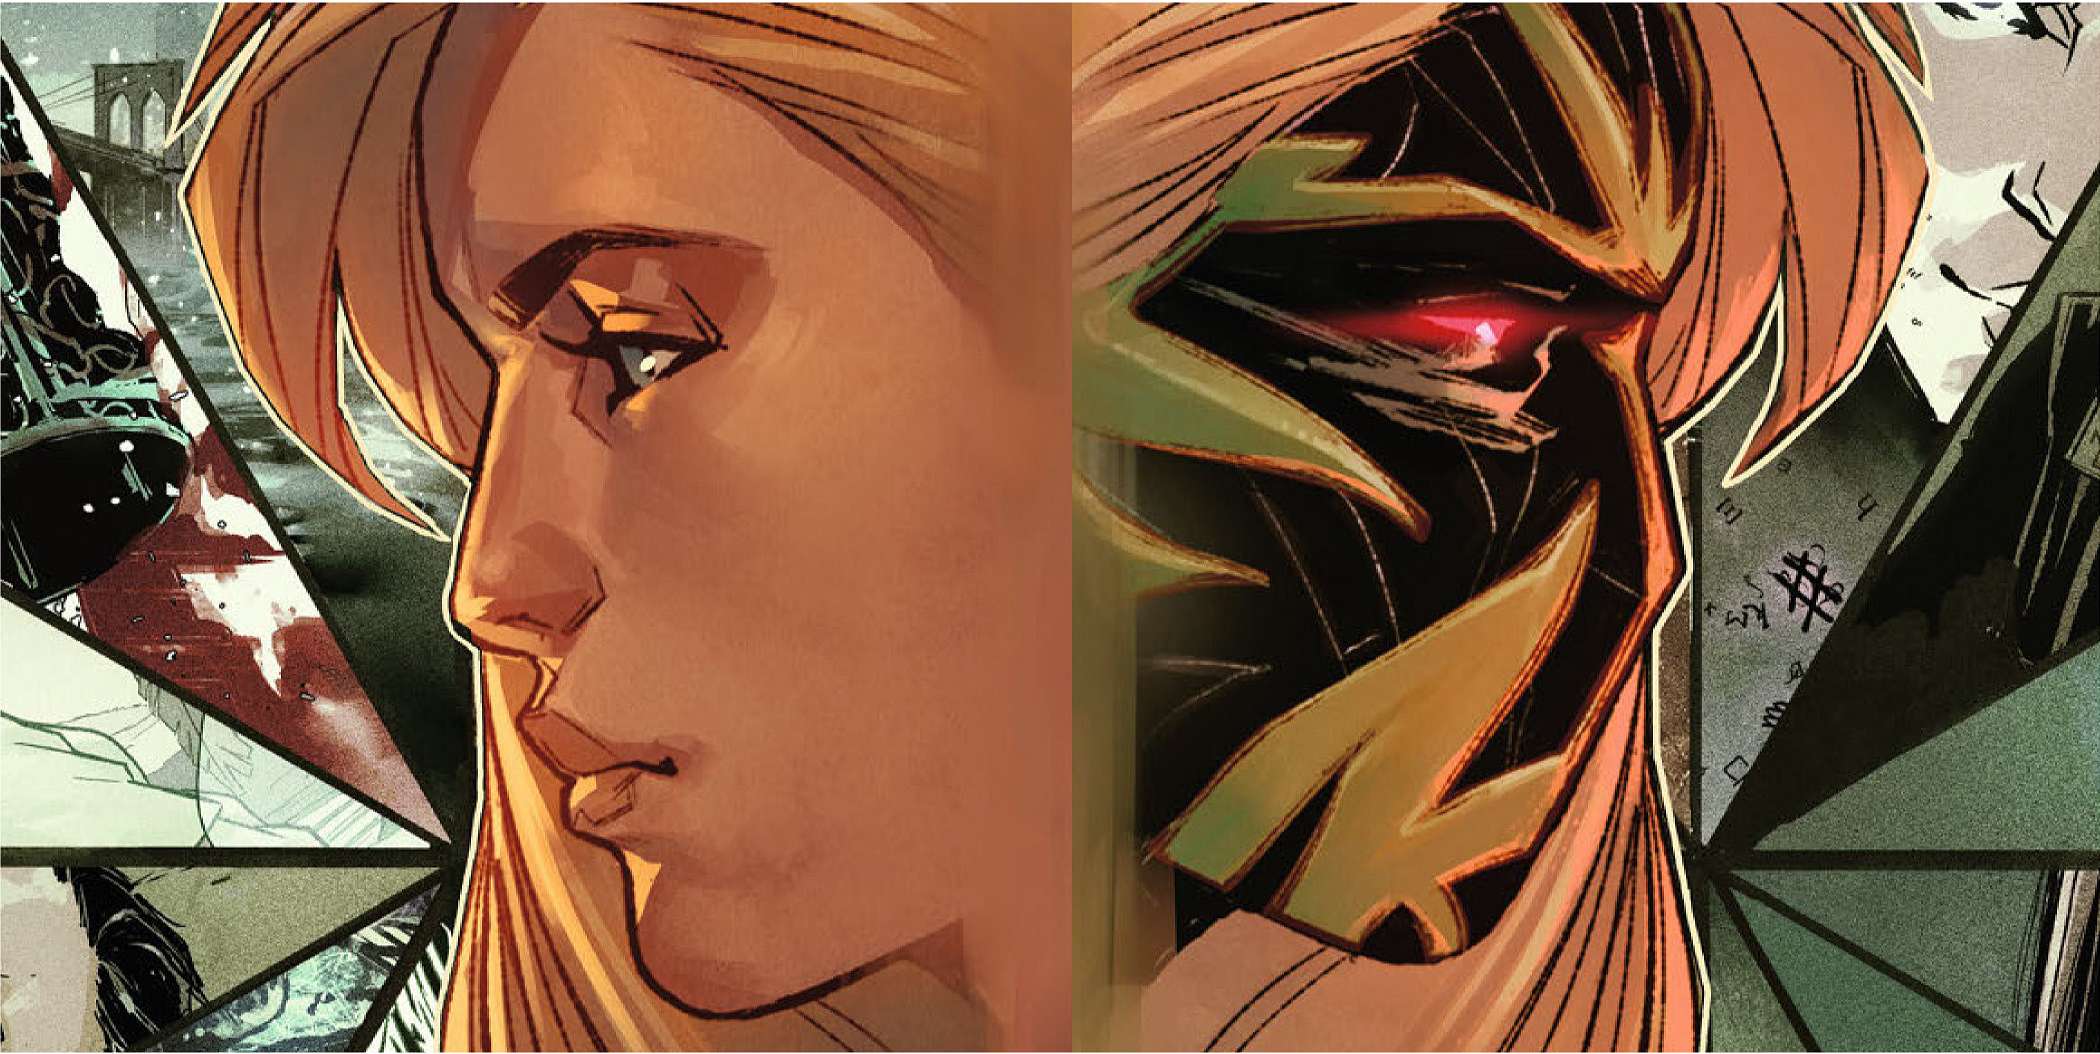 Top Cow’s Witchblade Kicks Off A New Arc In Issue #13